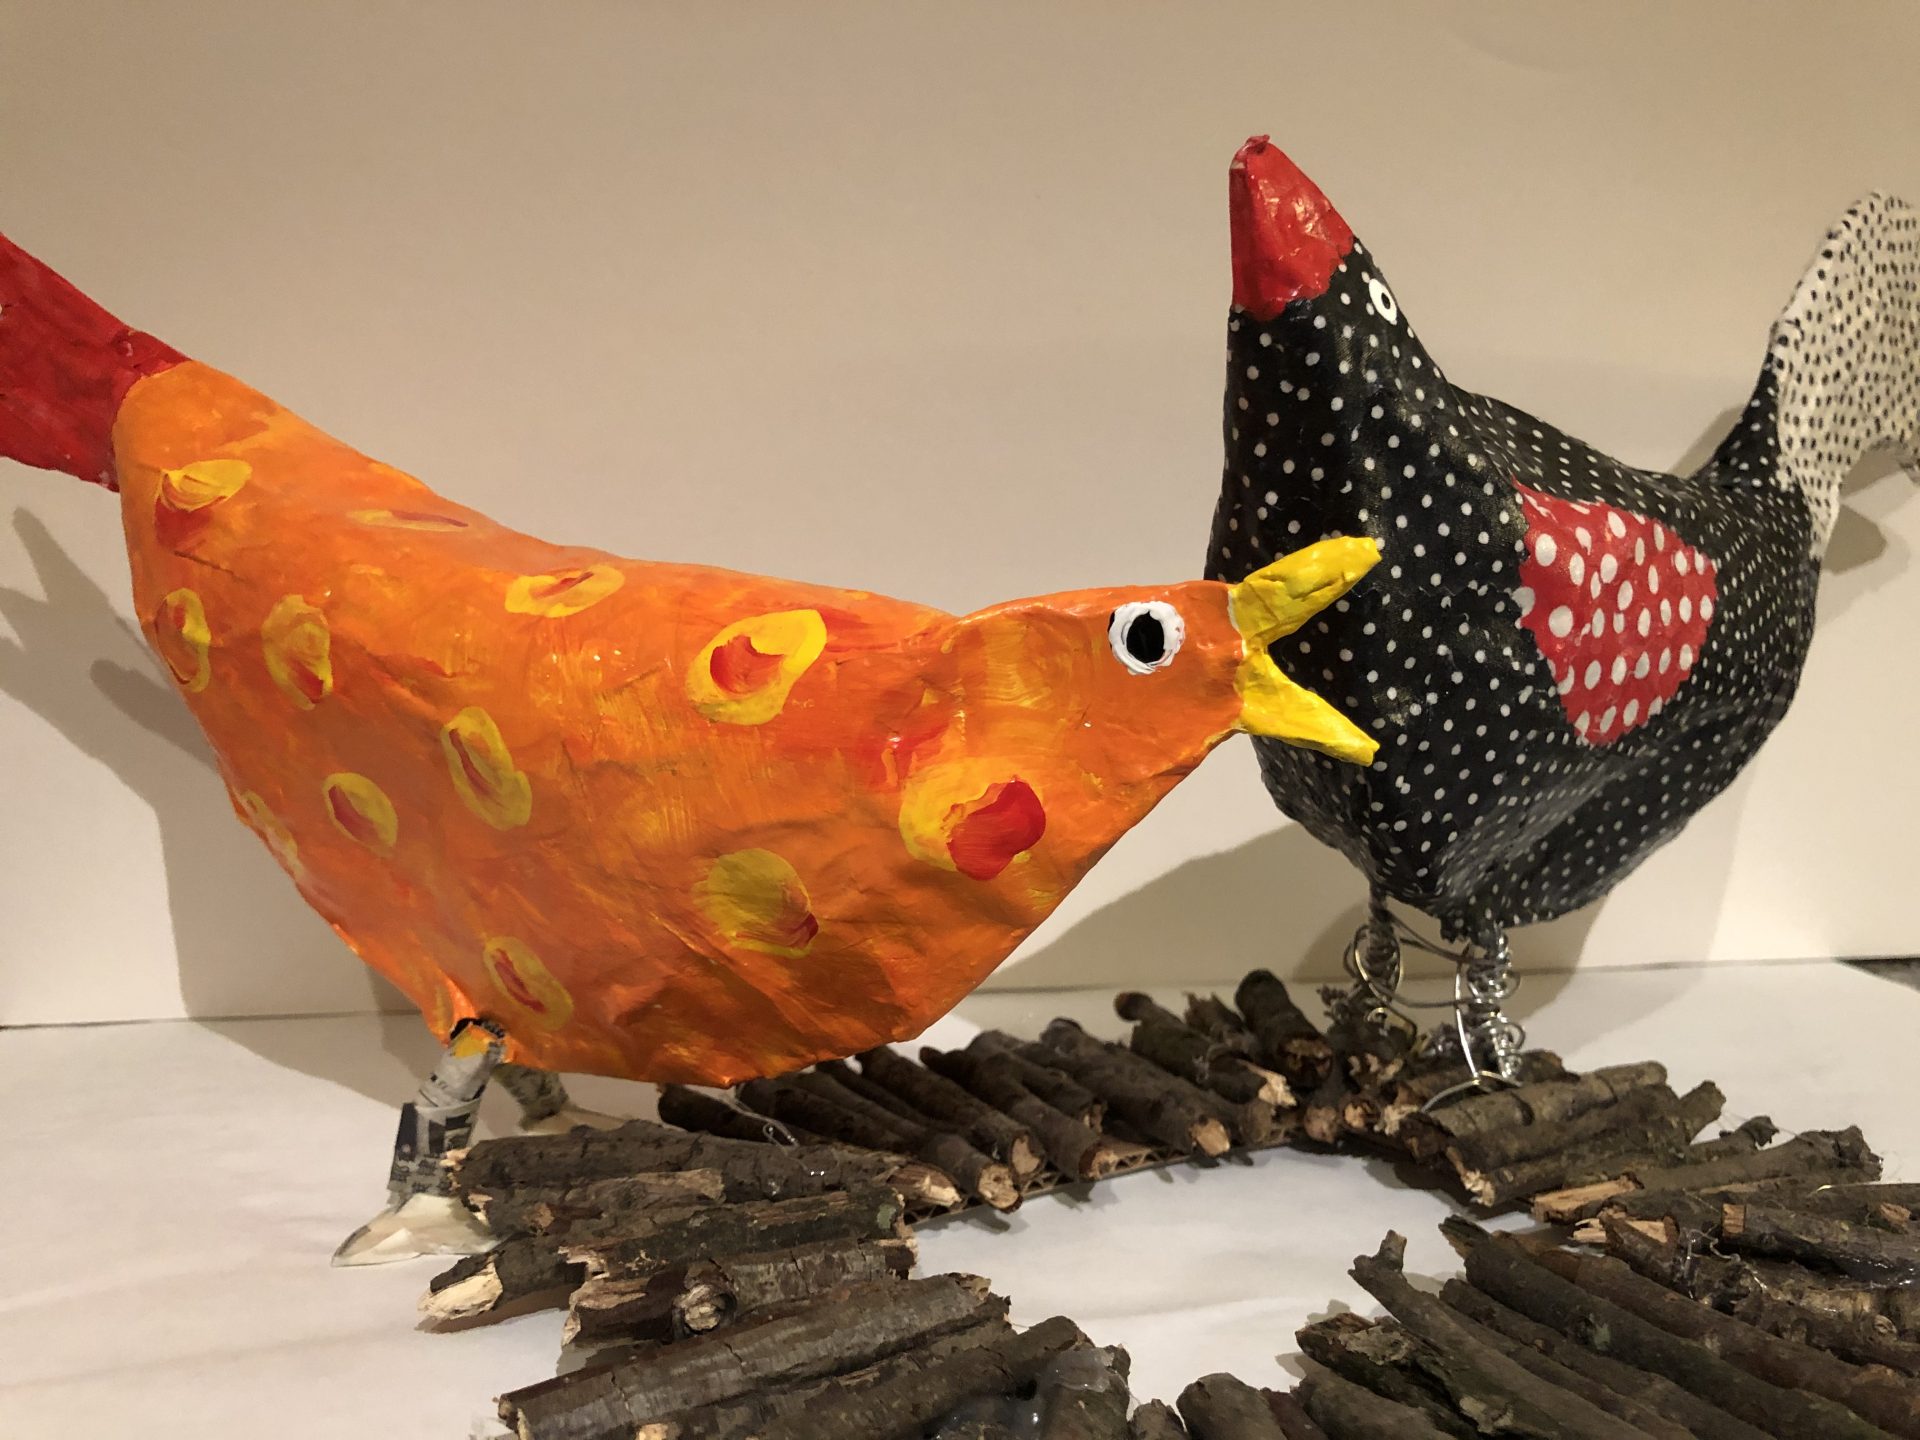 Paper Mache Chickens Howto, Materials, and Video VisArts